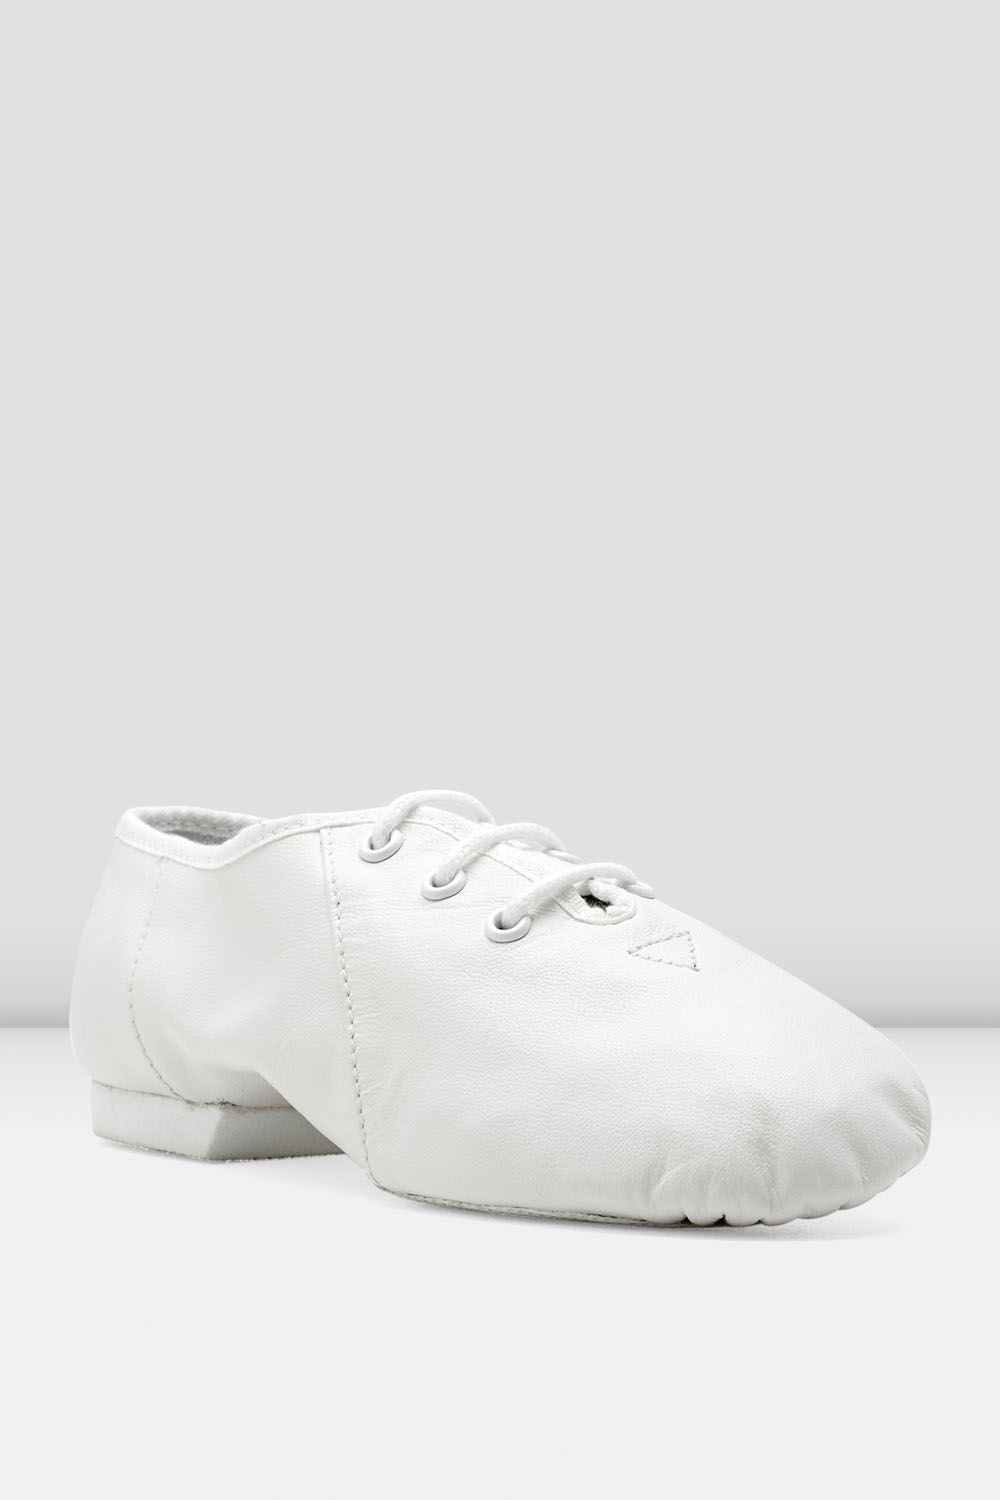 Childrens Jazzsoft Leather Jazz Shoes, White – BLOCH Dance US